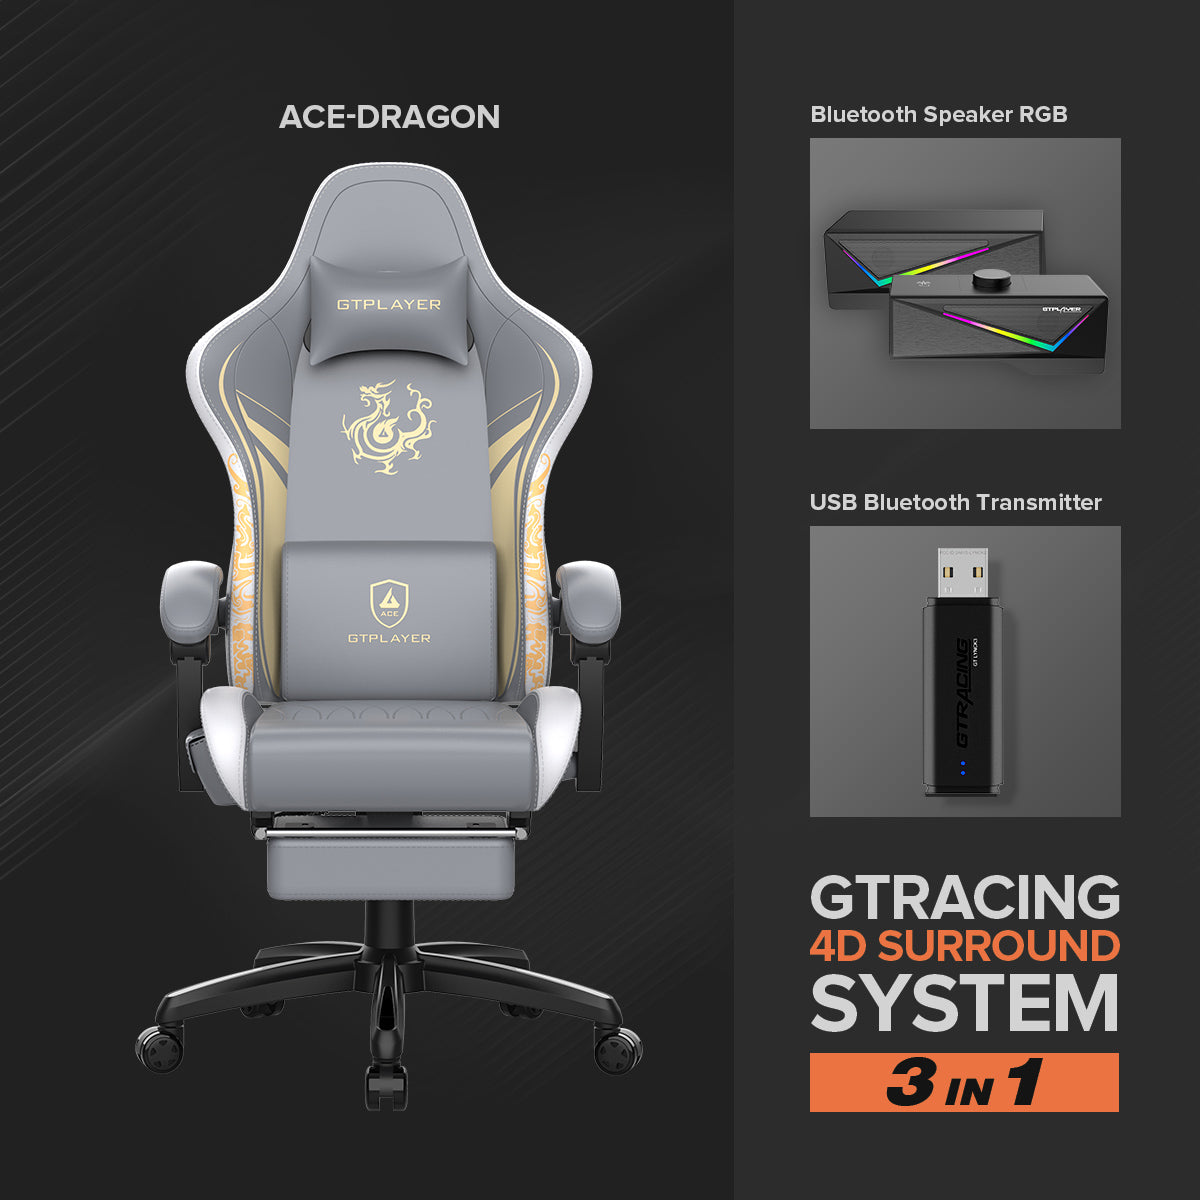 GTRACING 4D Surround System (Ace-Dragon, Bluetooth Speaker, and USB transmitter 3 in 1) - GTRACING